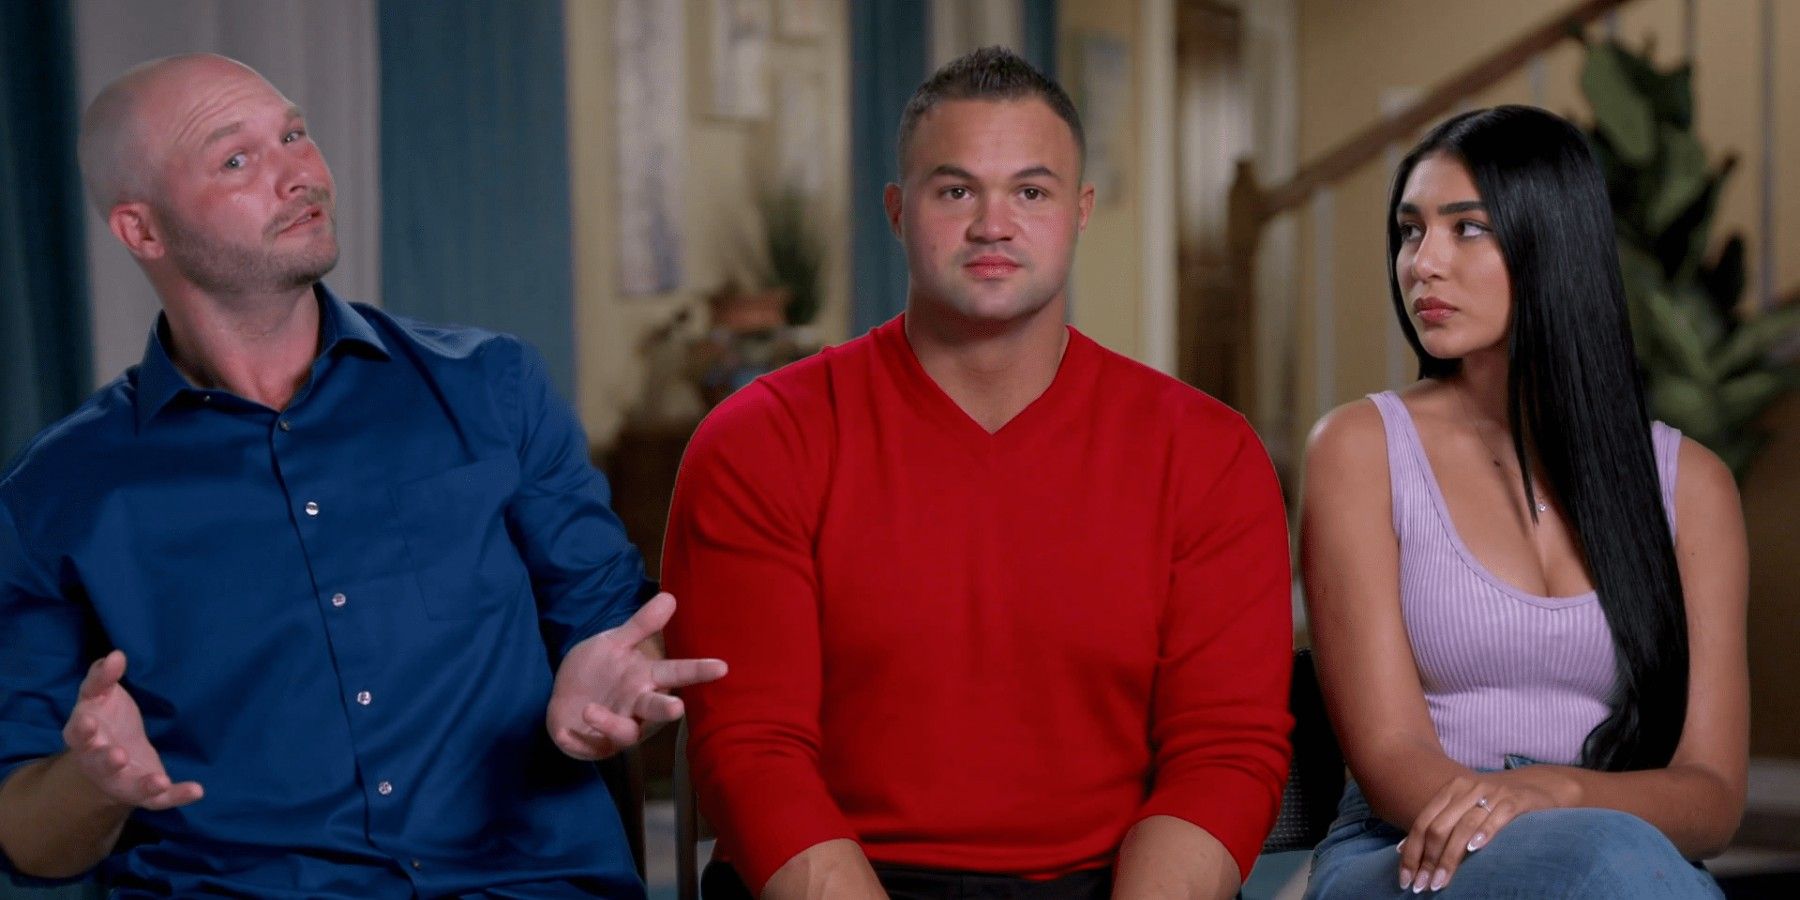 Patrick Mendes, Thaís Ramone, and John Mendes from 90 Day Fiancé Season 9